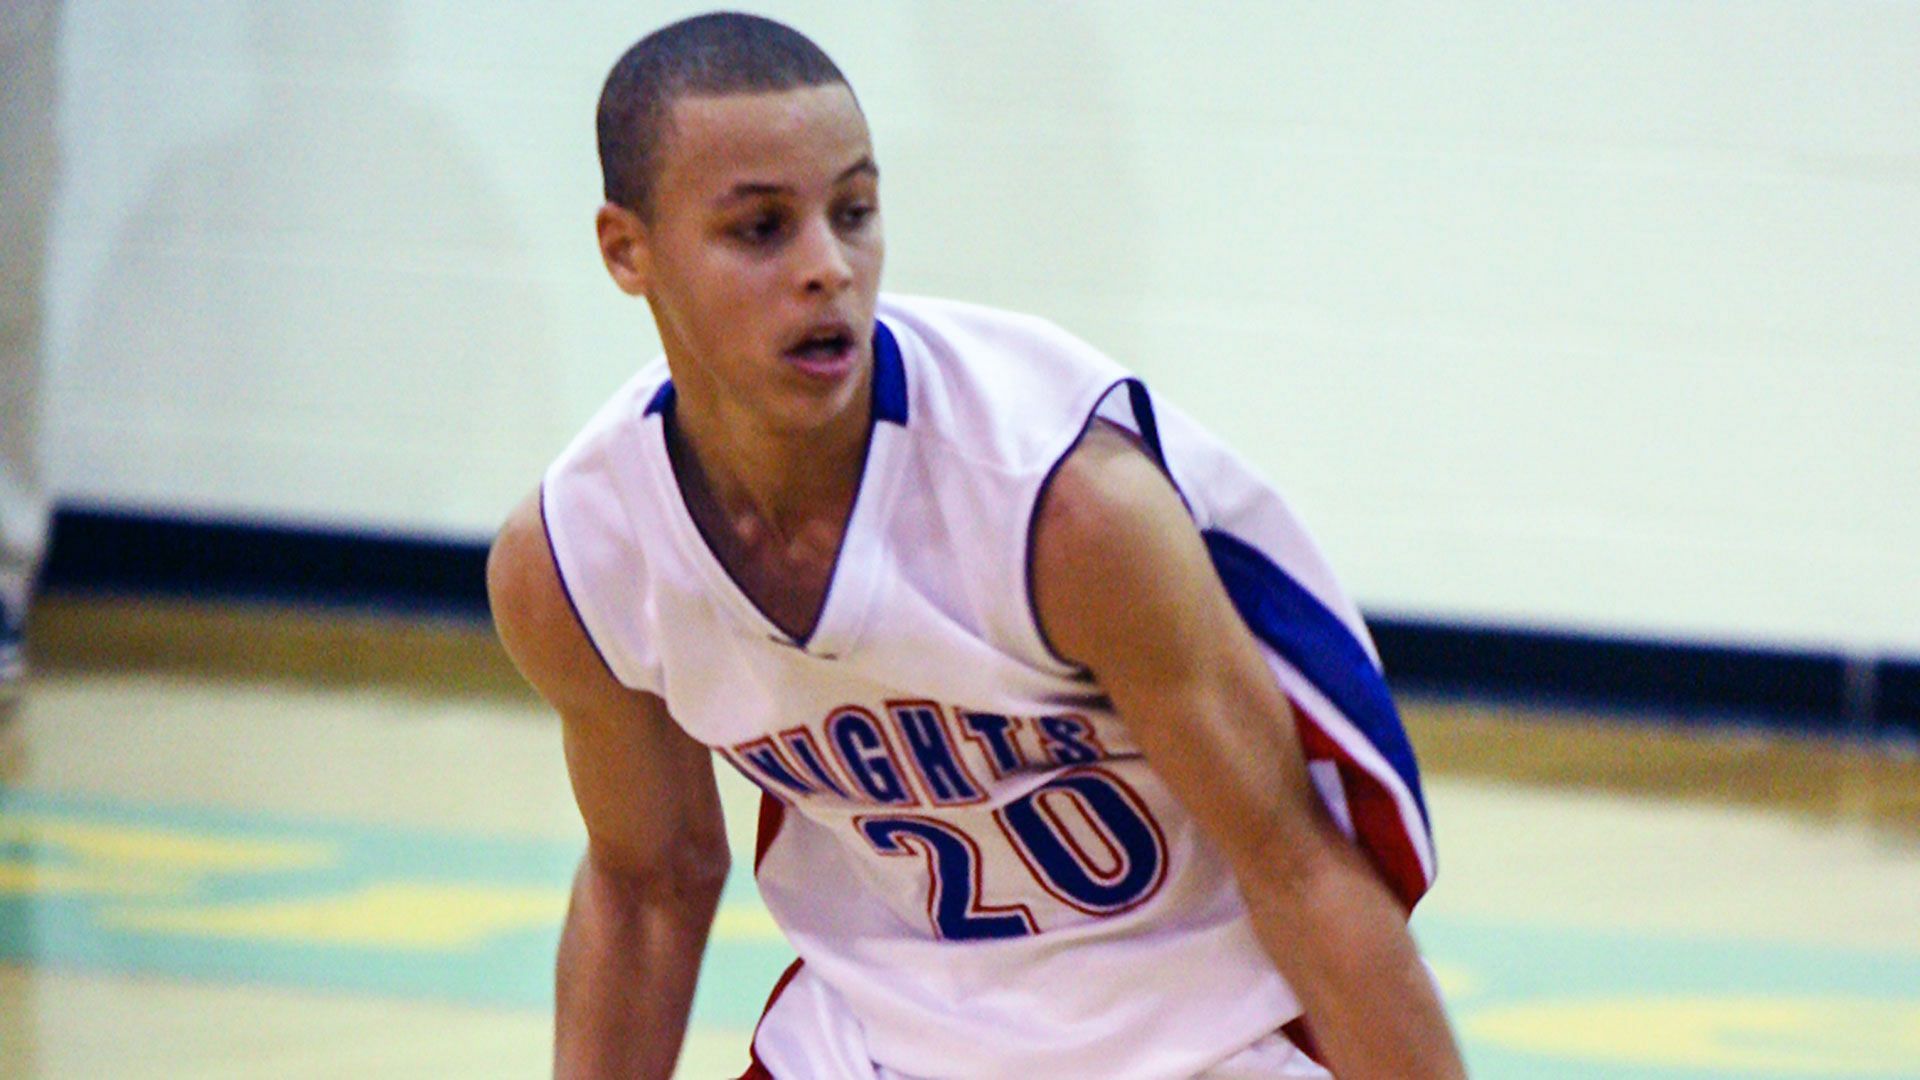 Skinny and undersized, Steph Curry work on every aspect of his game to become a good high school basketball player. [Photo: Sporting News]